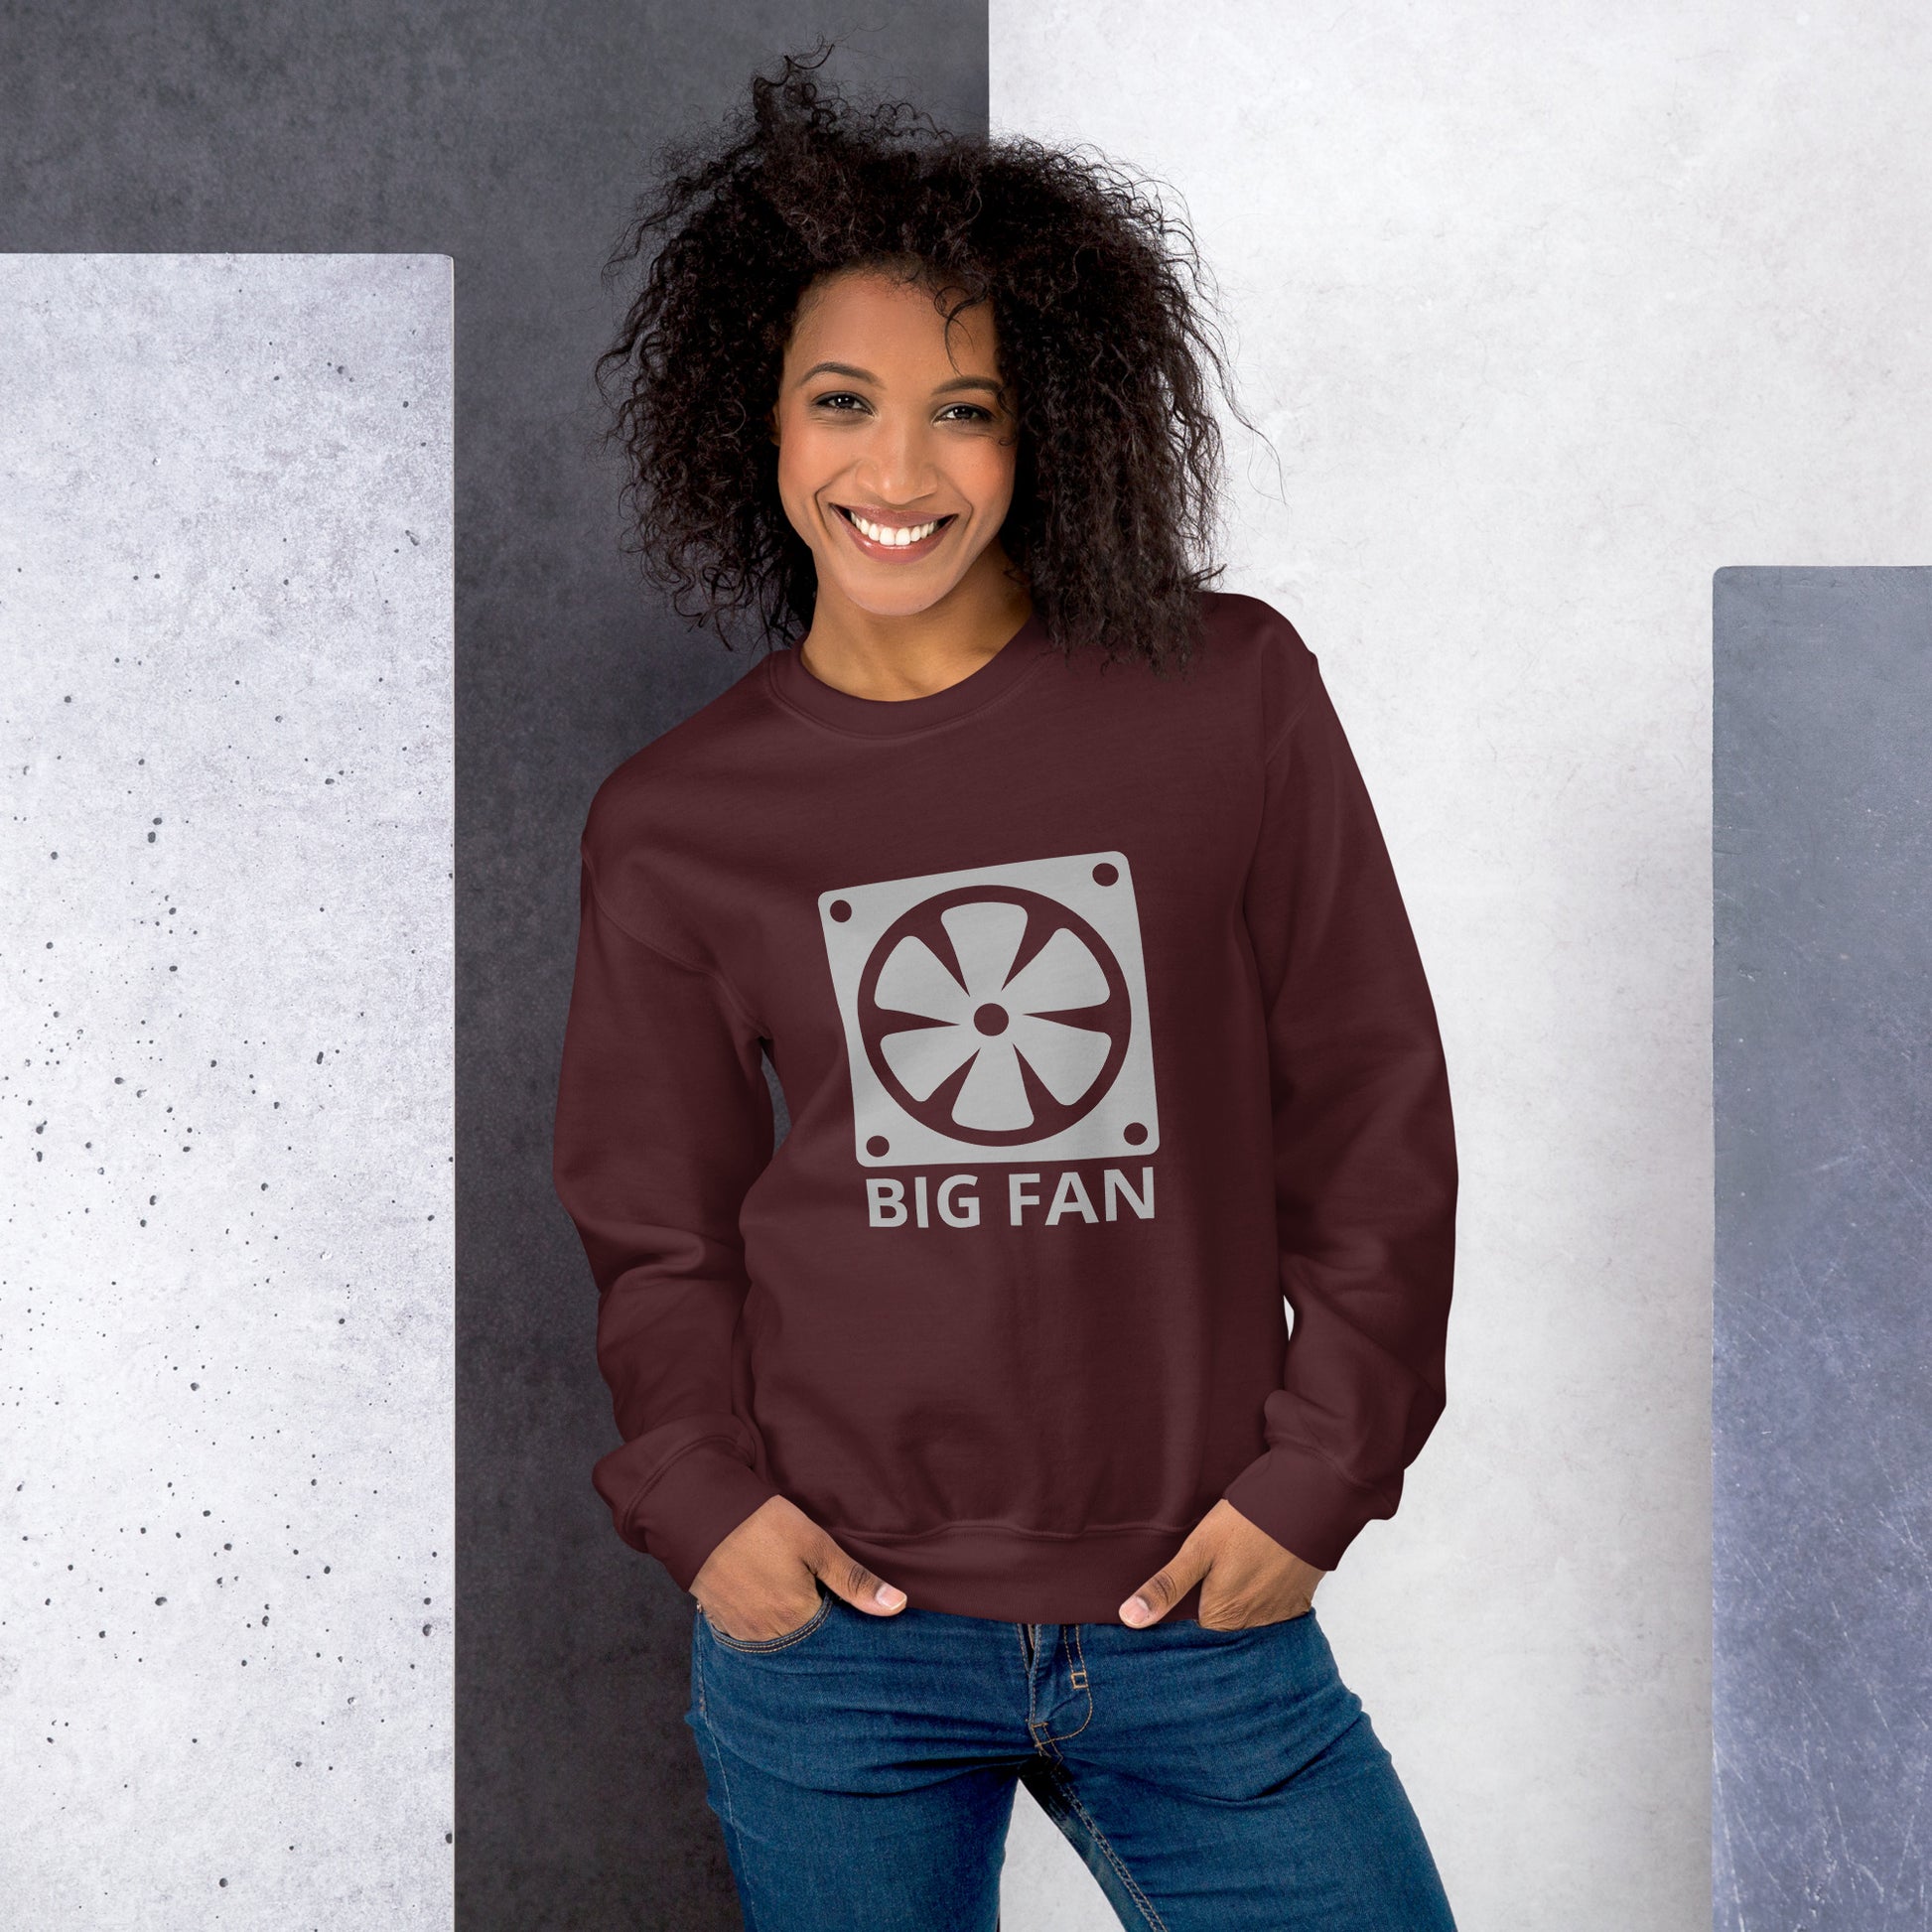 Women with maroon sweatshirt with image of a big computer fan and the text "BIG FAN"